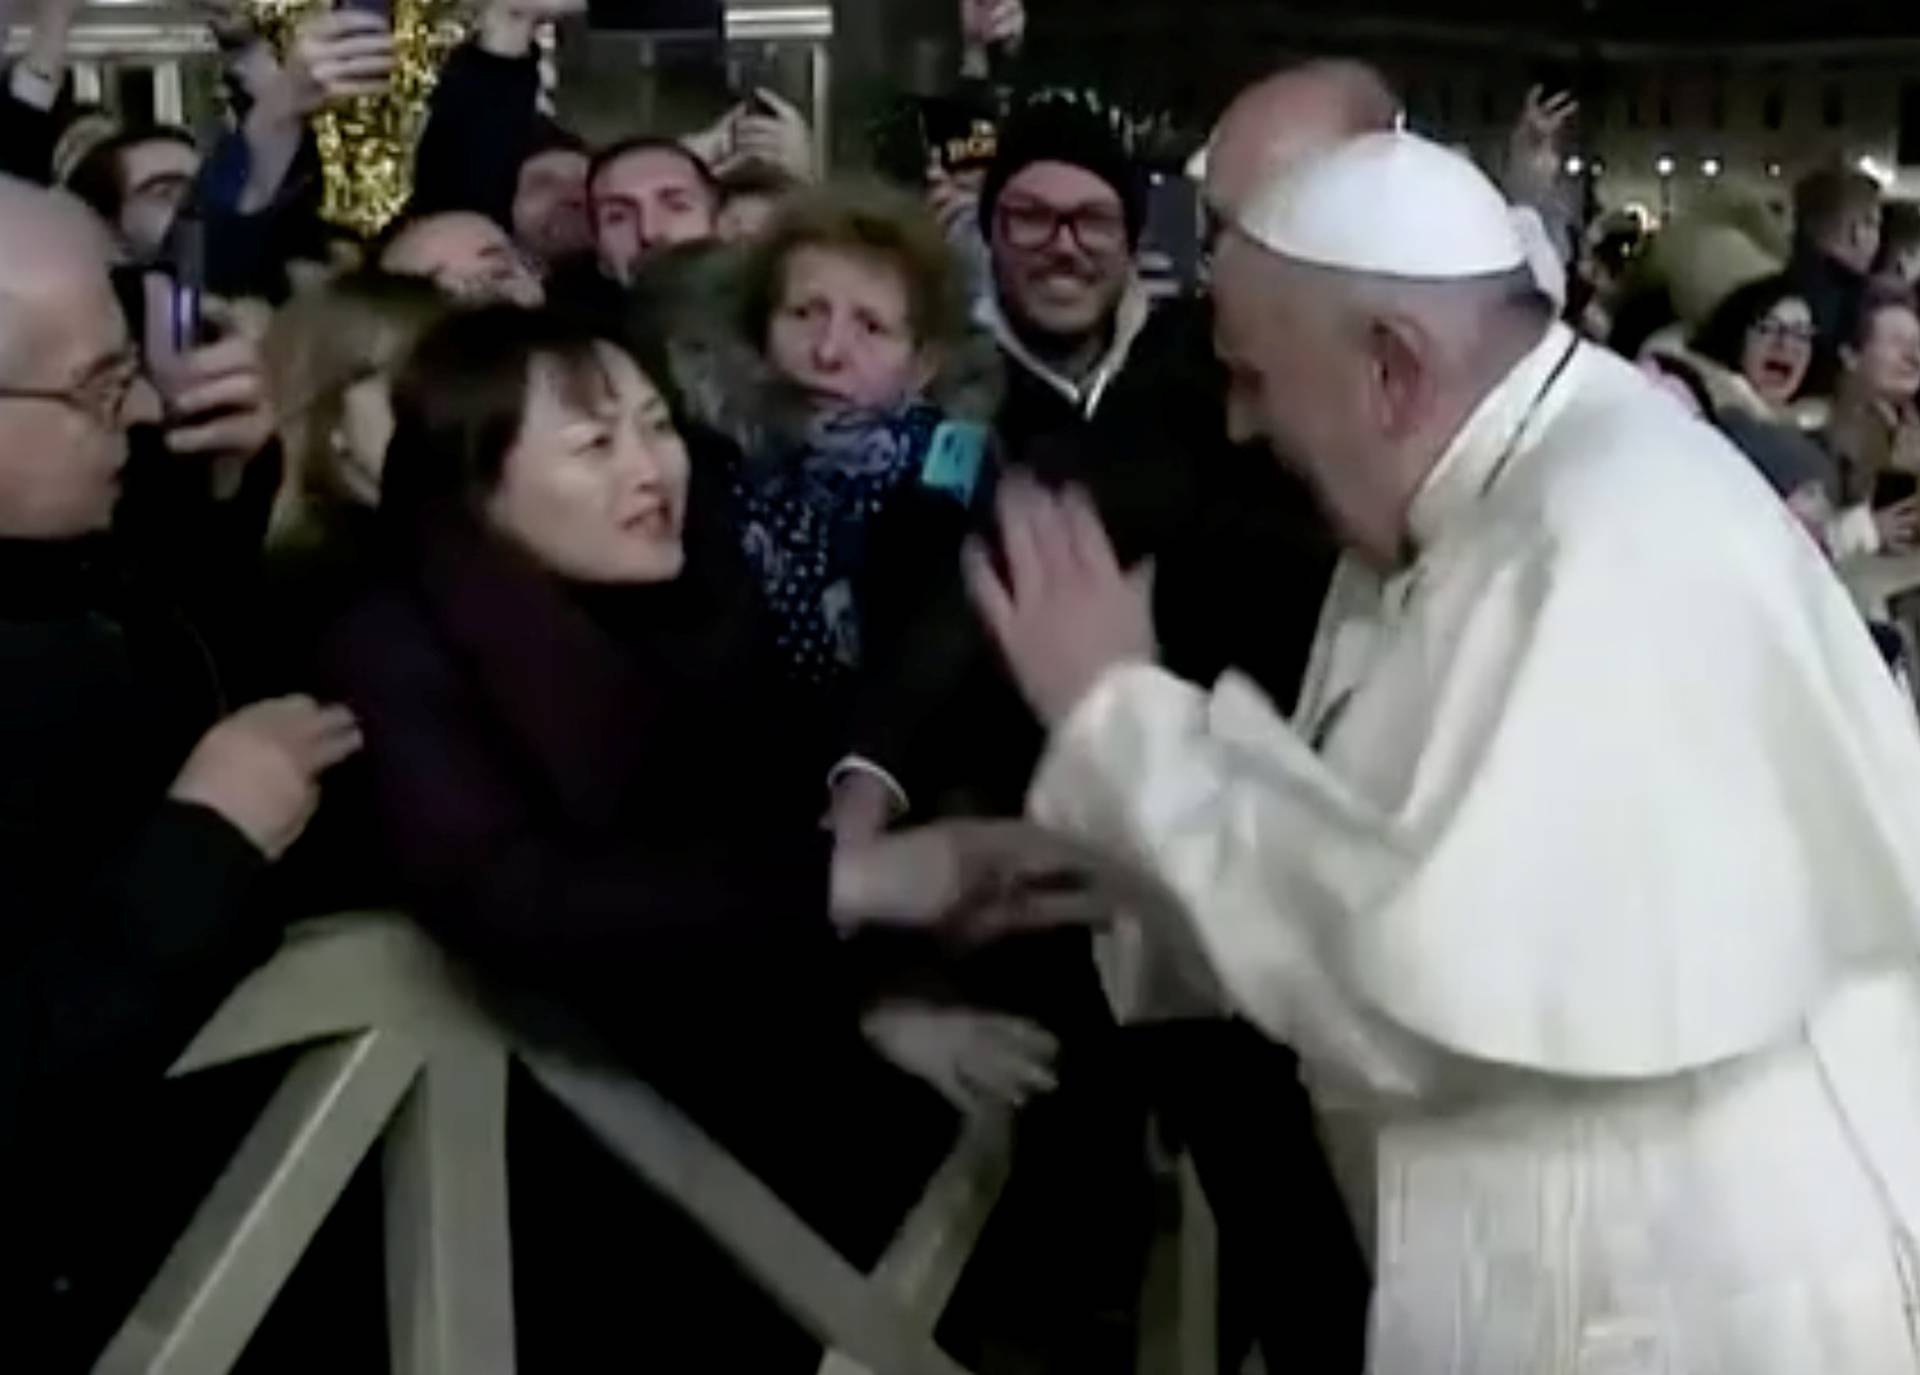 Pope Francis slaps the hand of a woman who grabbed him, at Saint Peter's Square at the Vatican